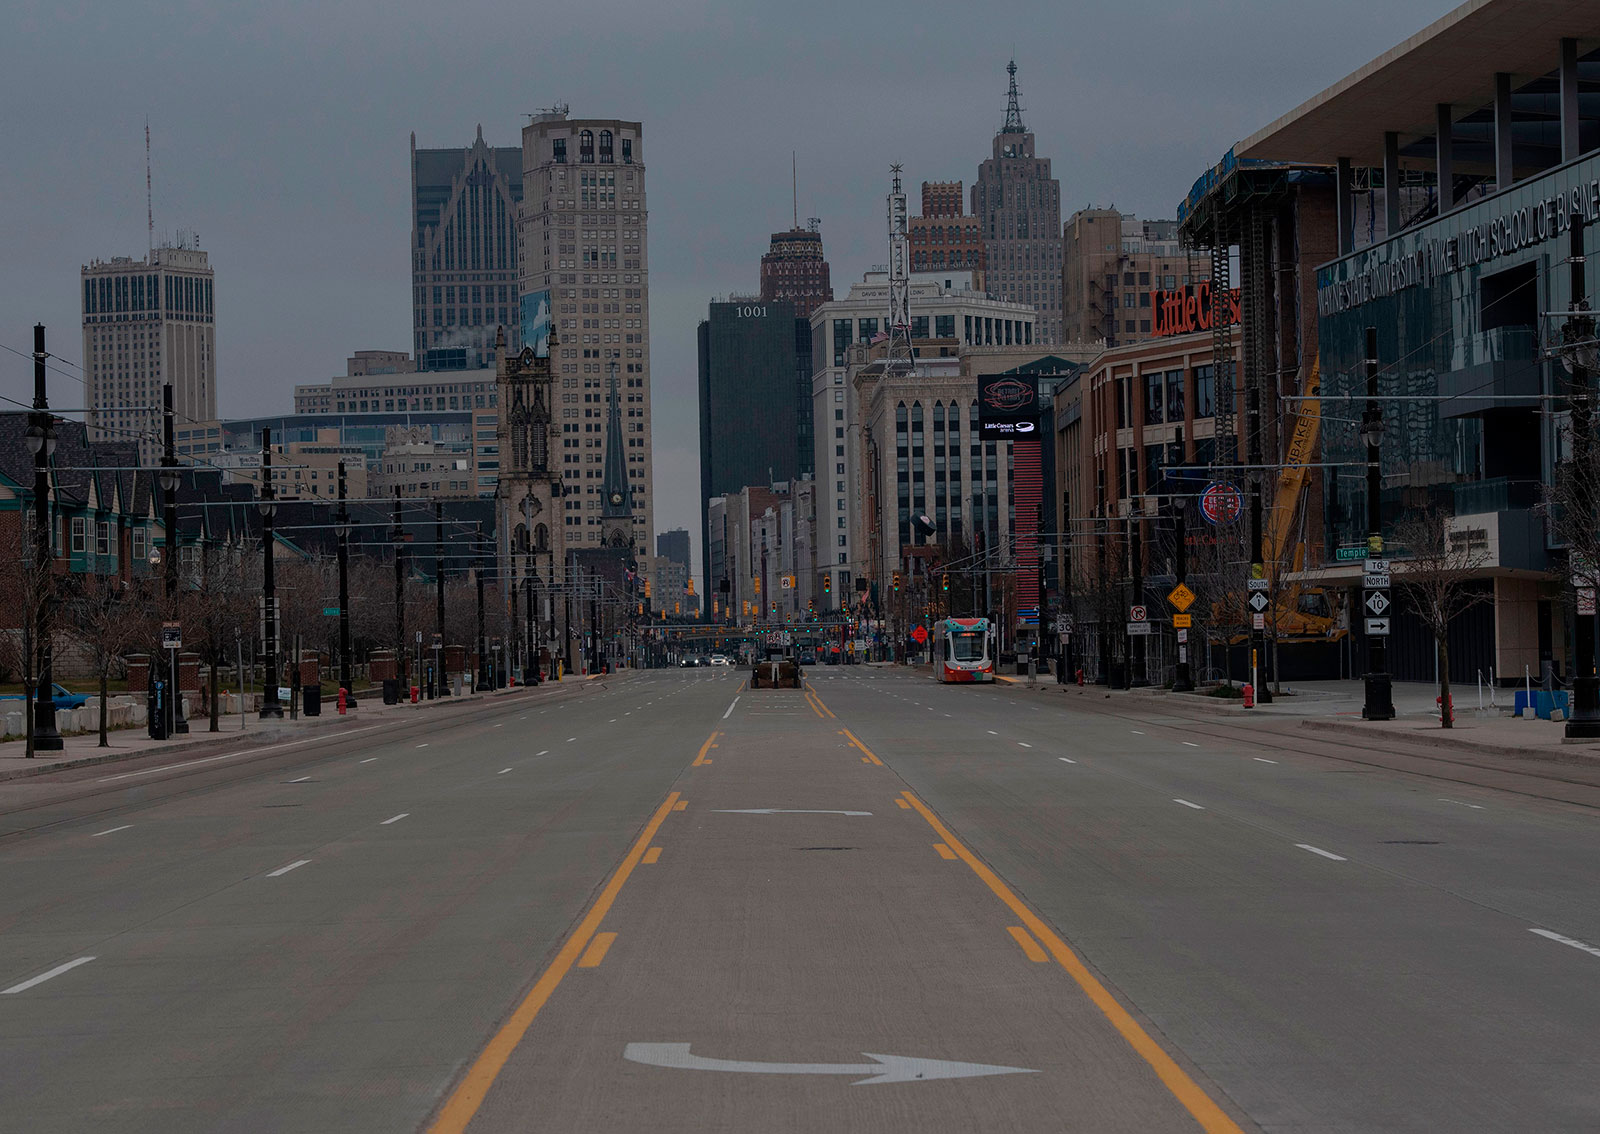 A nearly empty street in Detroit, Michigan, on March 24.